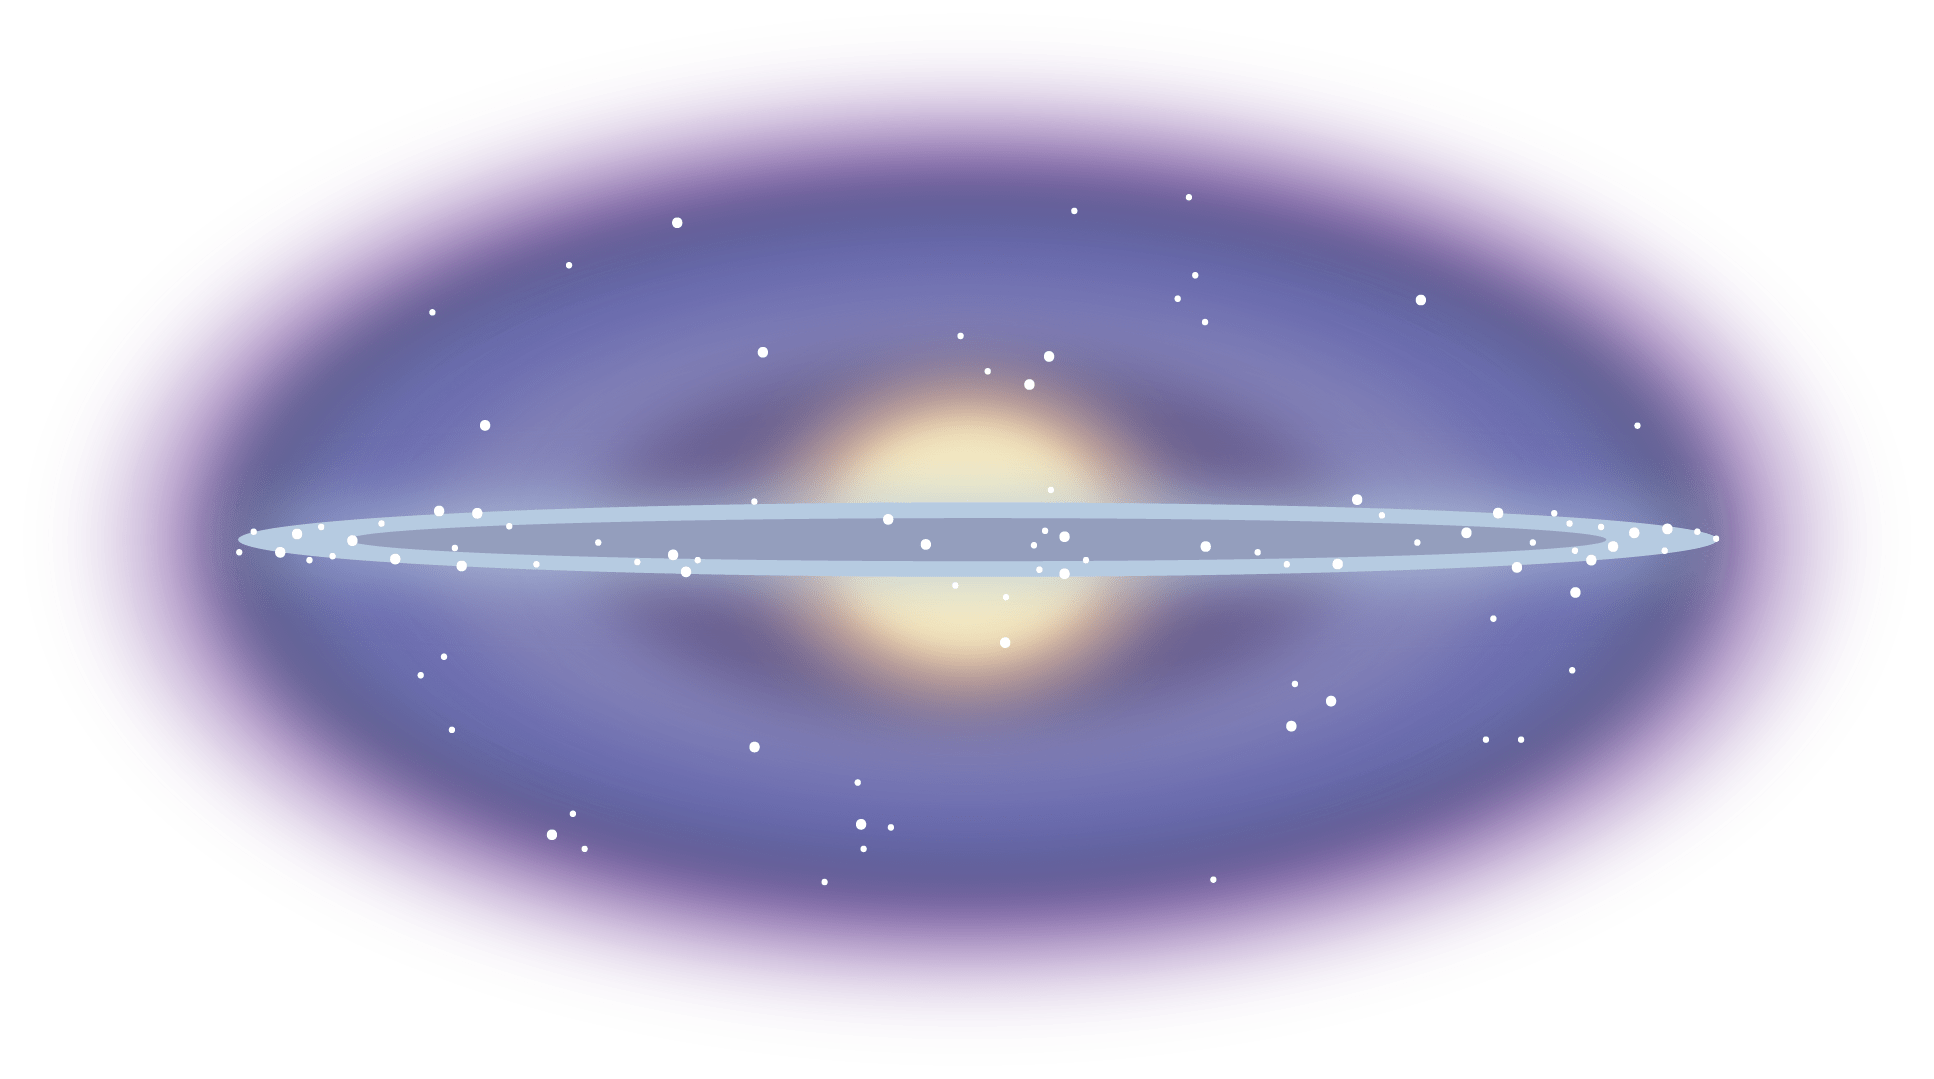 A horizontal oval is outlined by a diffuse, bright purple surrounding a darker purple outline which fades through lighter and brighter purple colors as it moves inward. The center of the shape is a hazy yellow circle. Cutting across the center of the image is a flattened disc outlined in light blue with a blueish-gray center. White dots representing stars speckle the image.